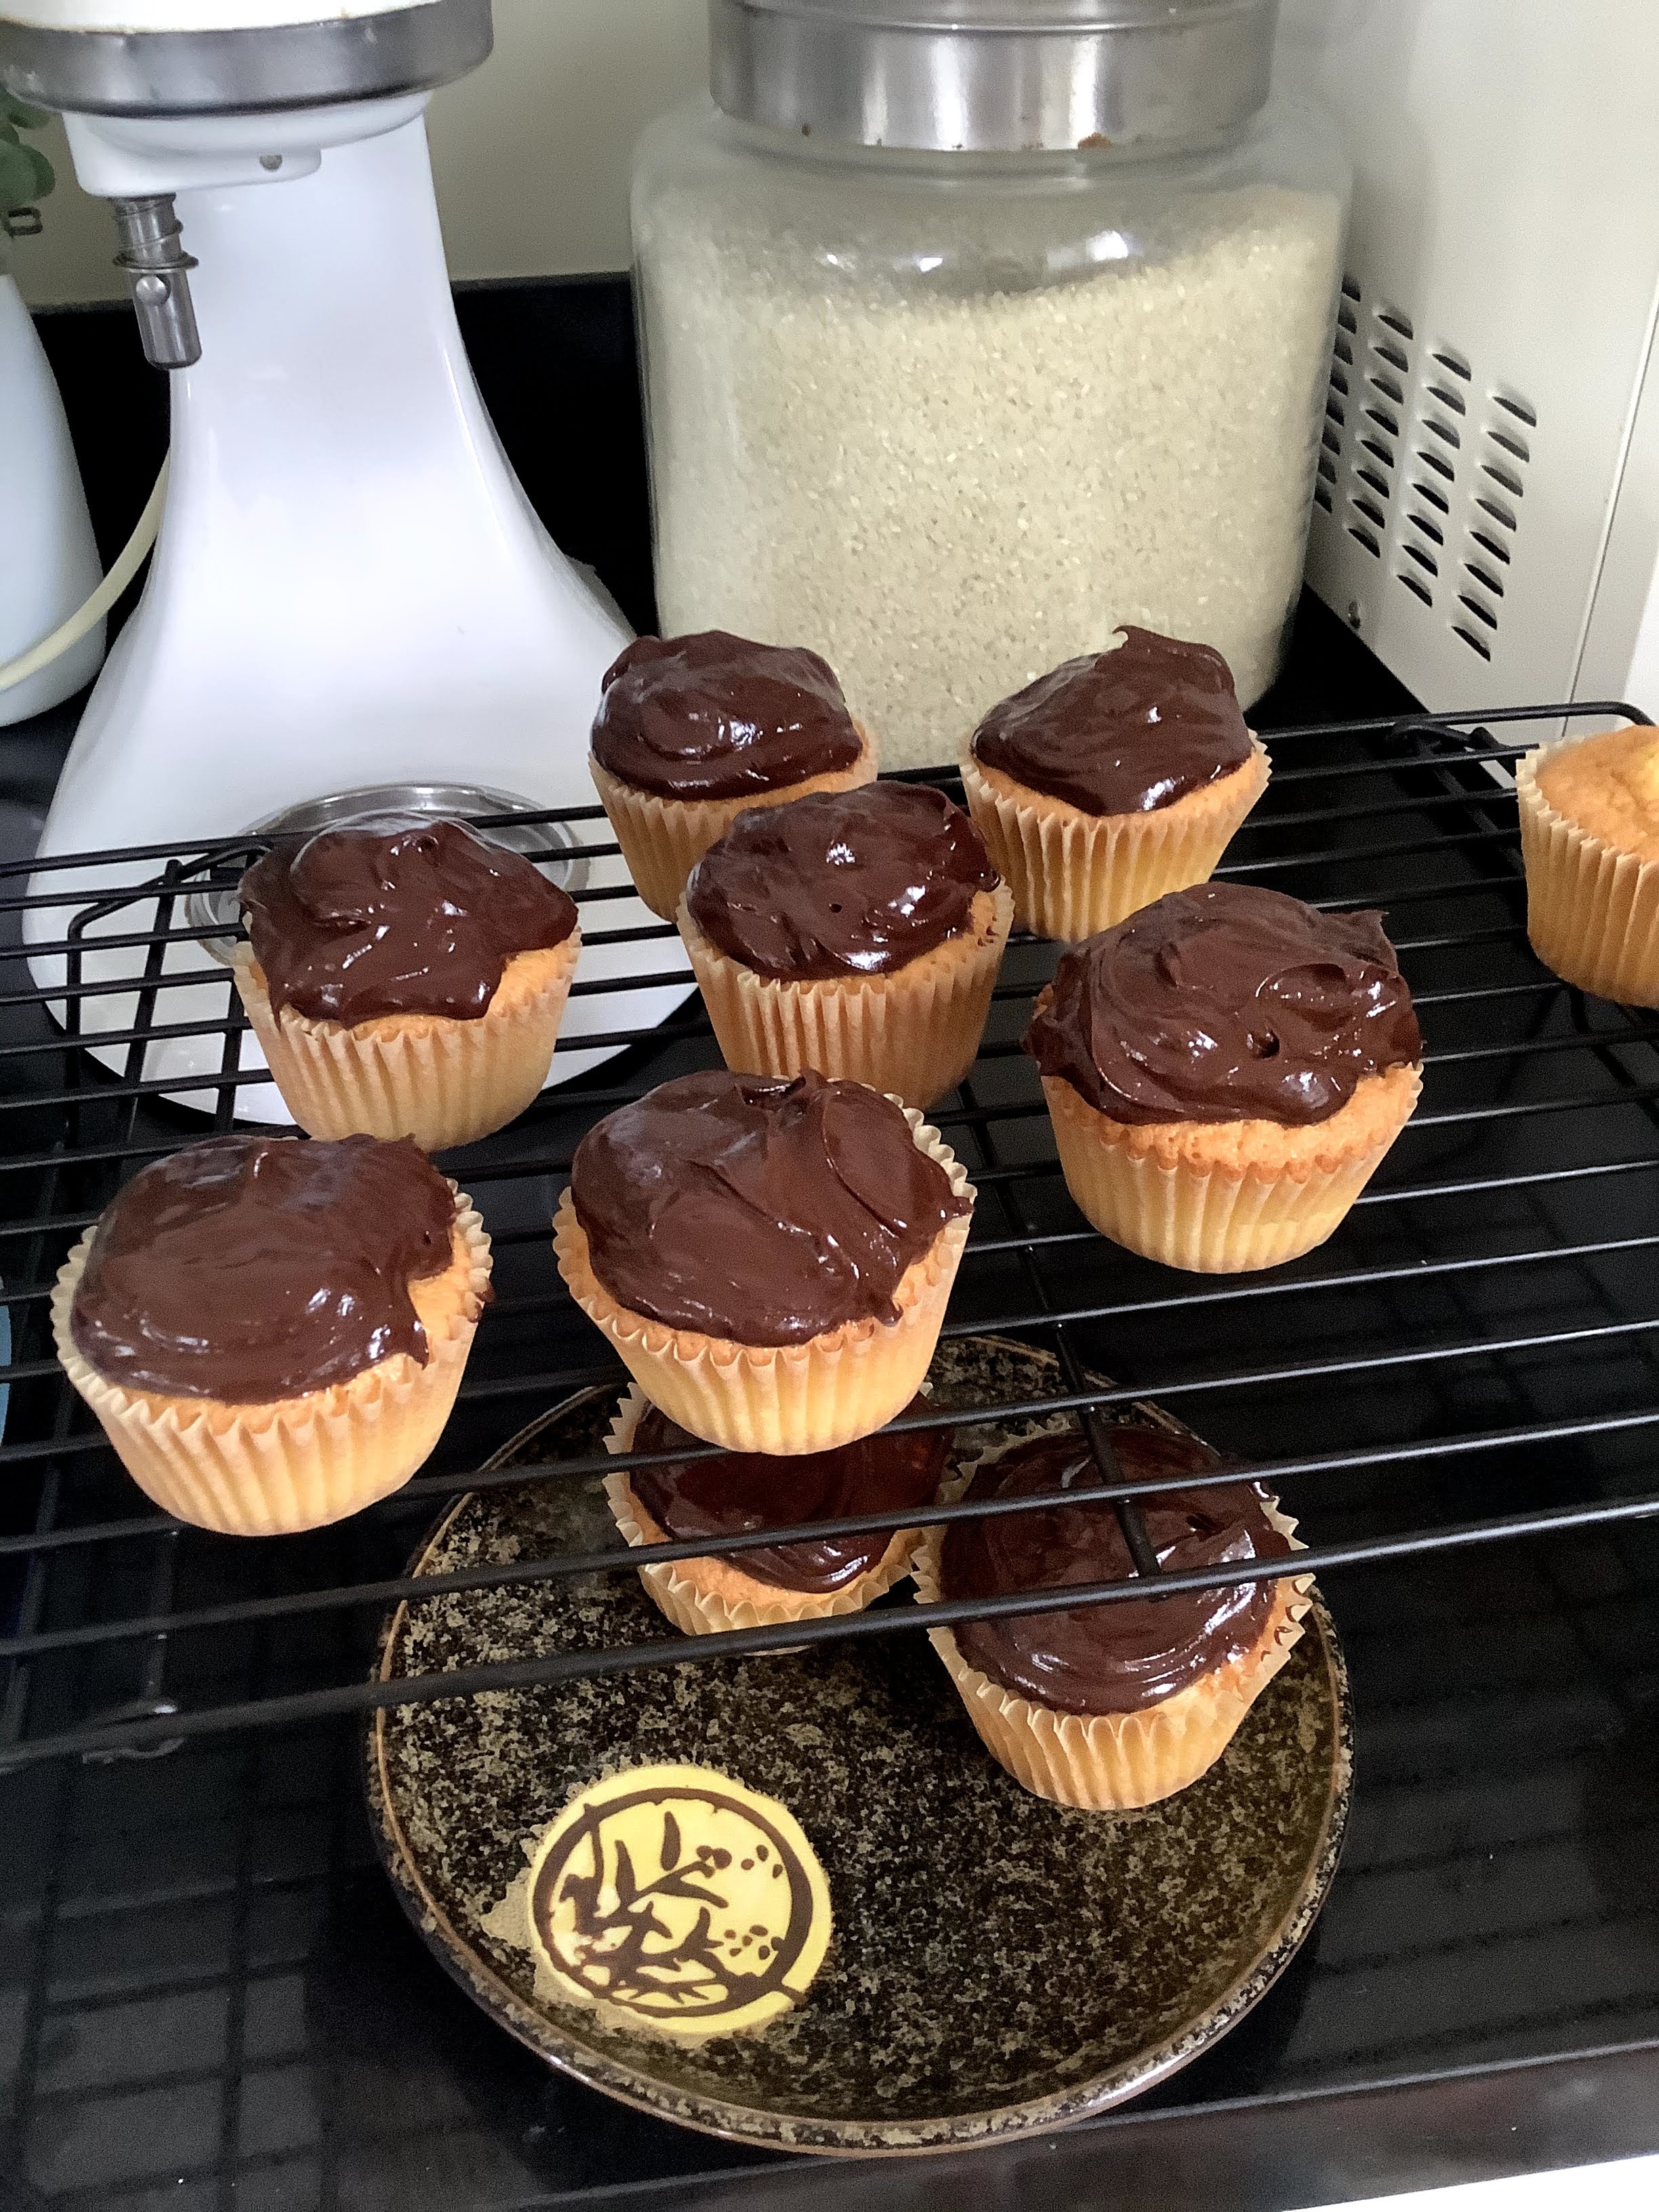 Yellow cupcakes topped with chocolate ganache, on a rack